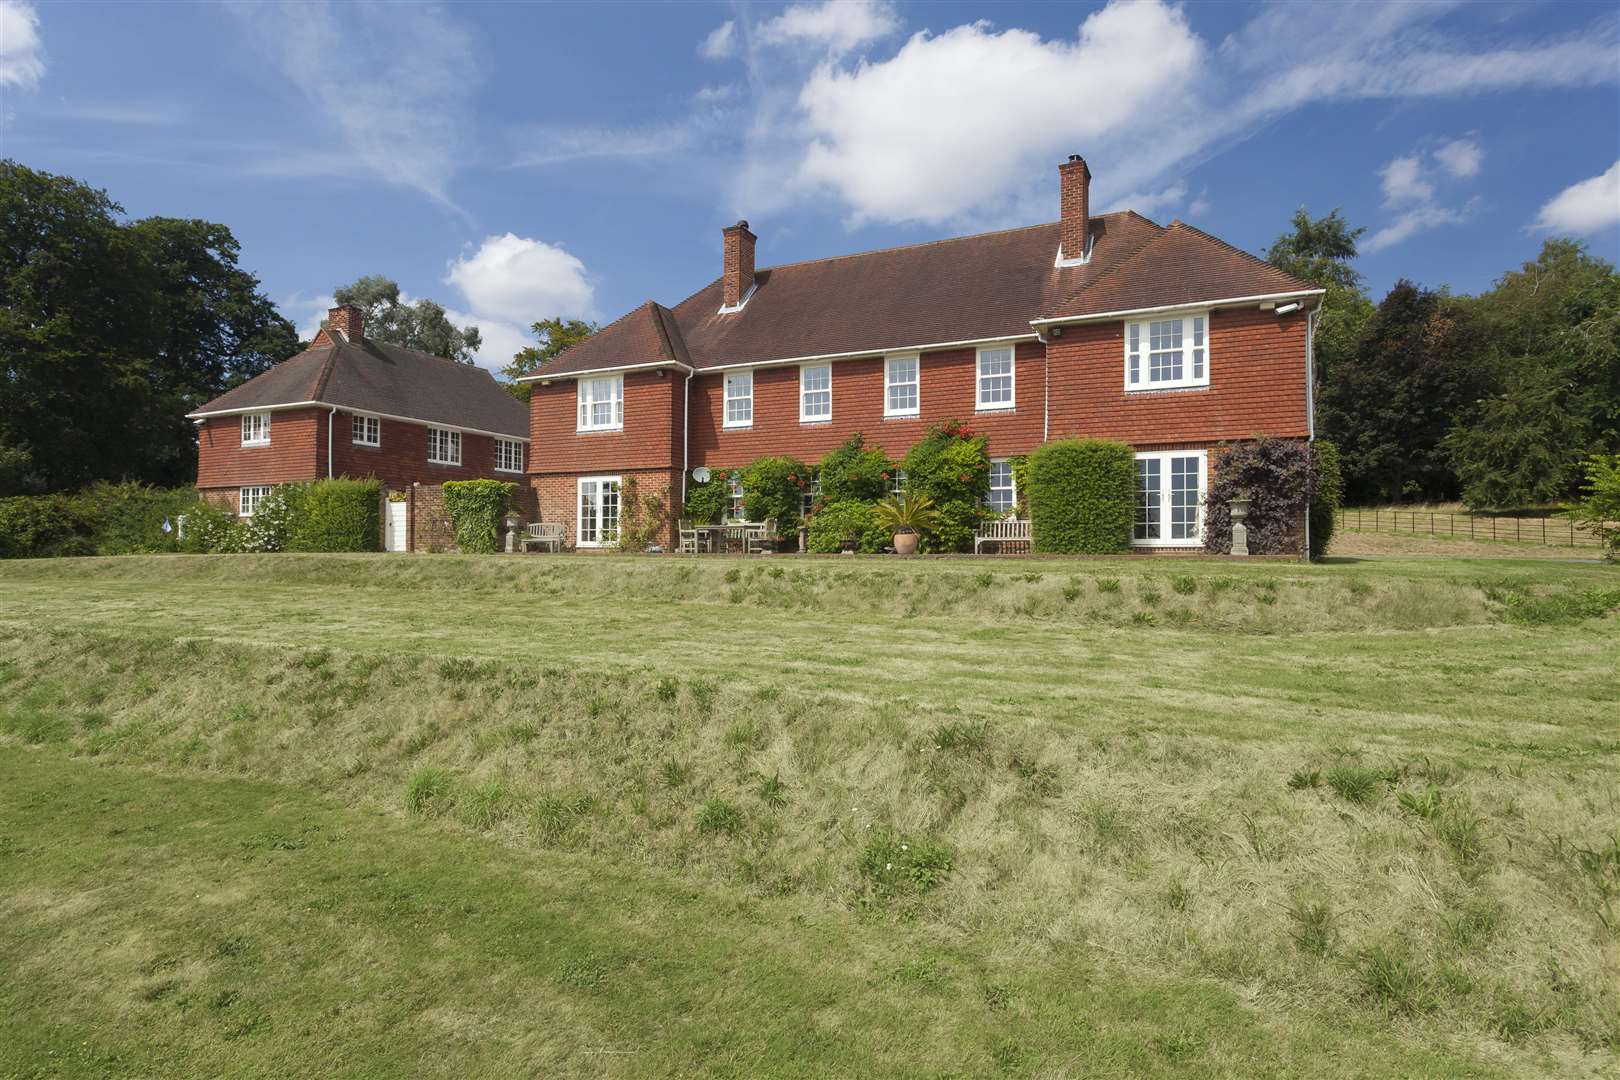 The main house on the site for sale, Cuckoo Field House